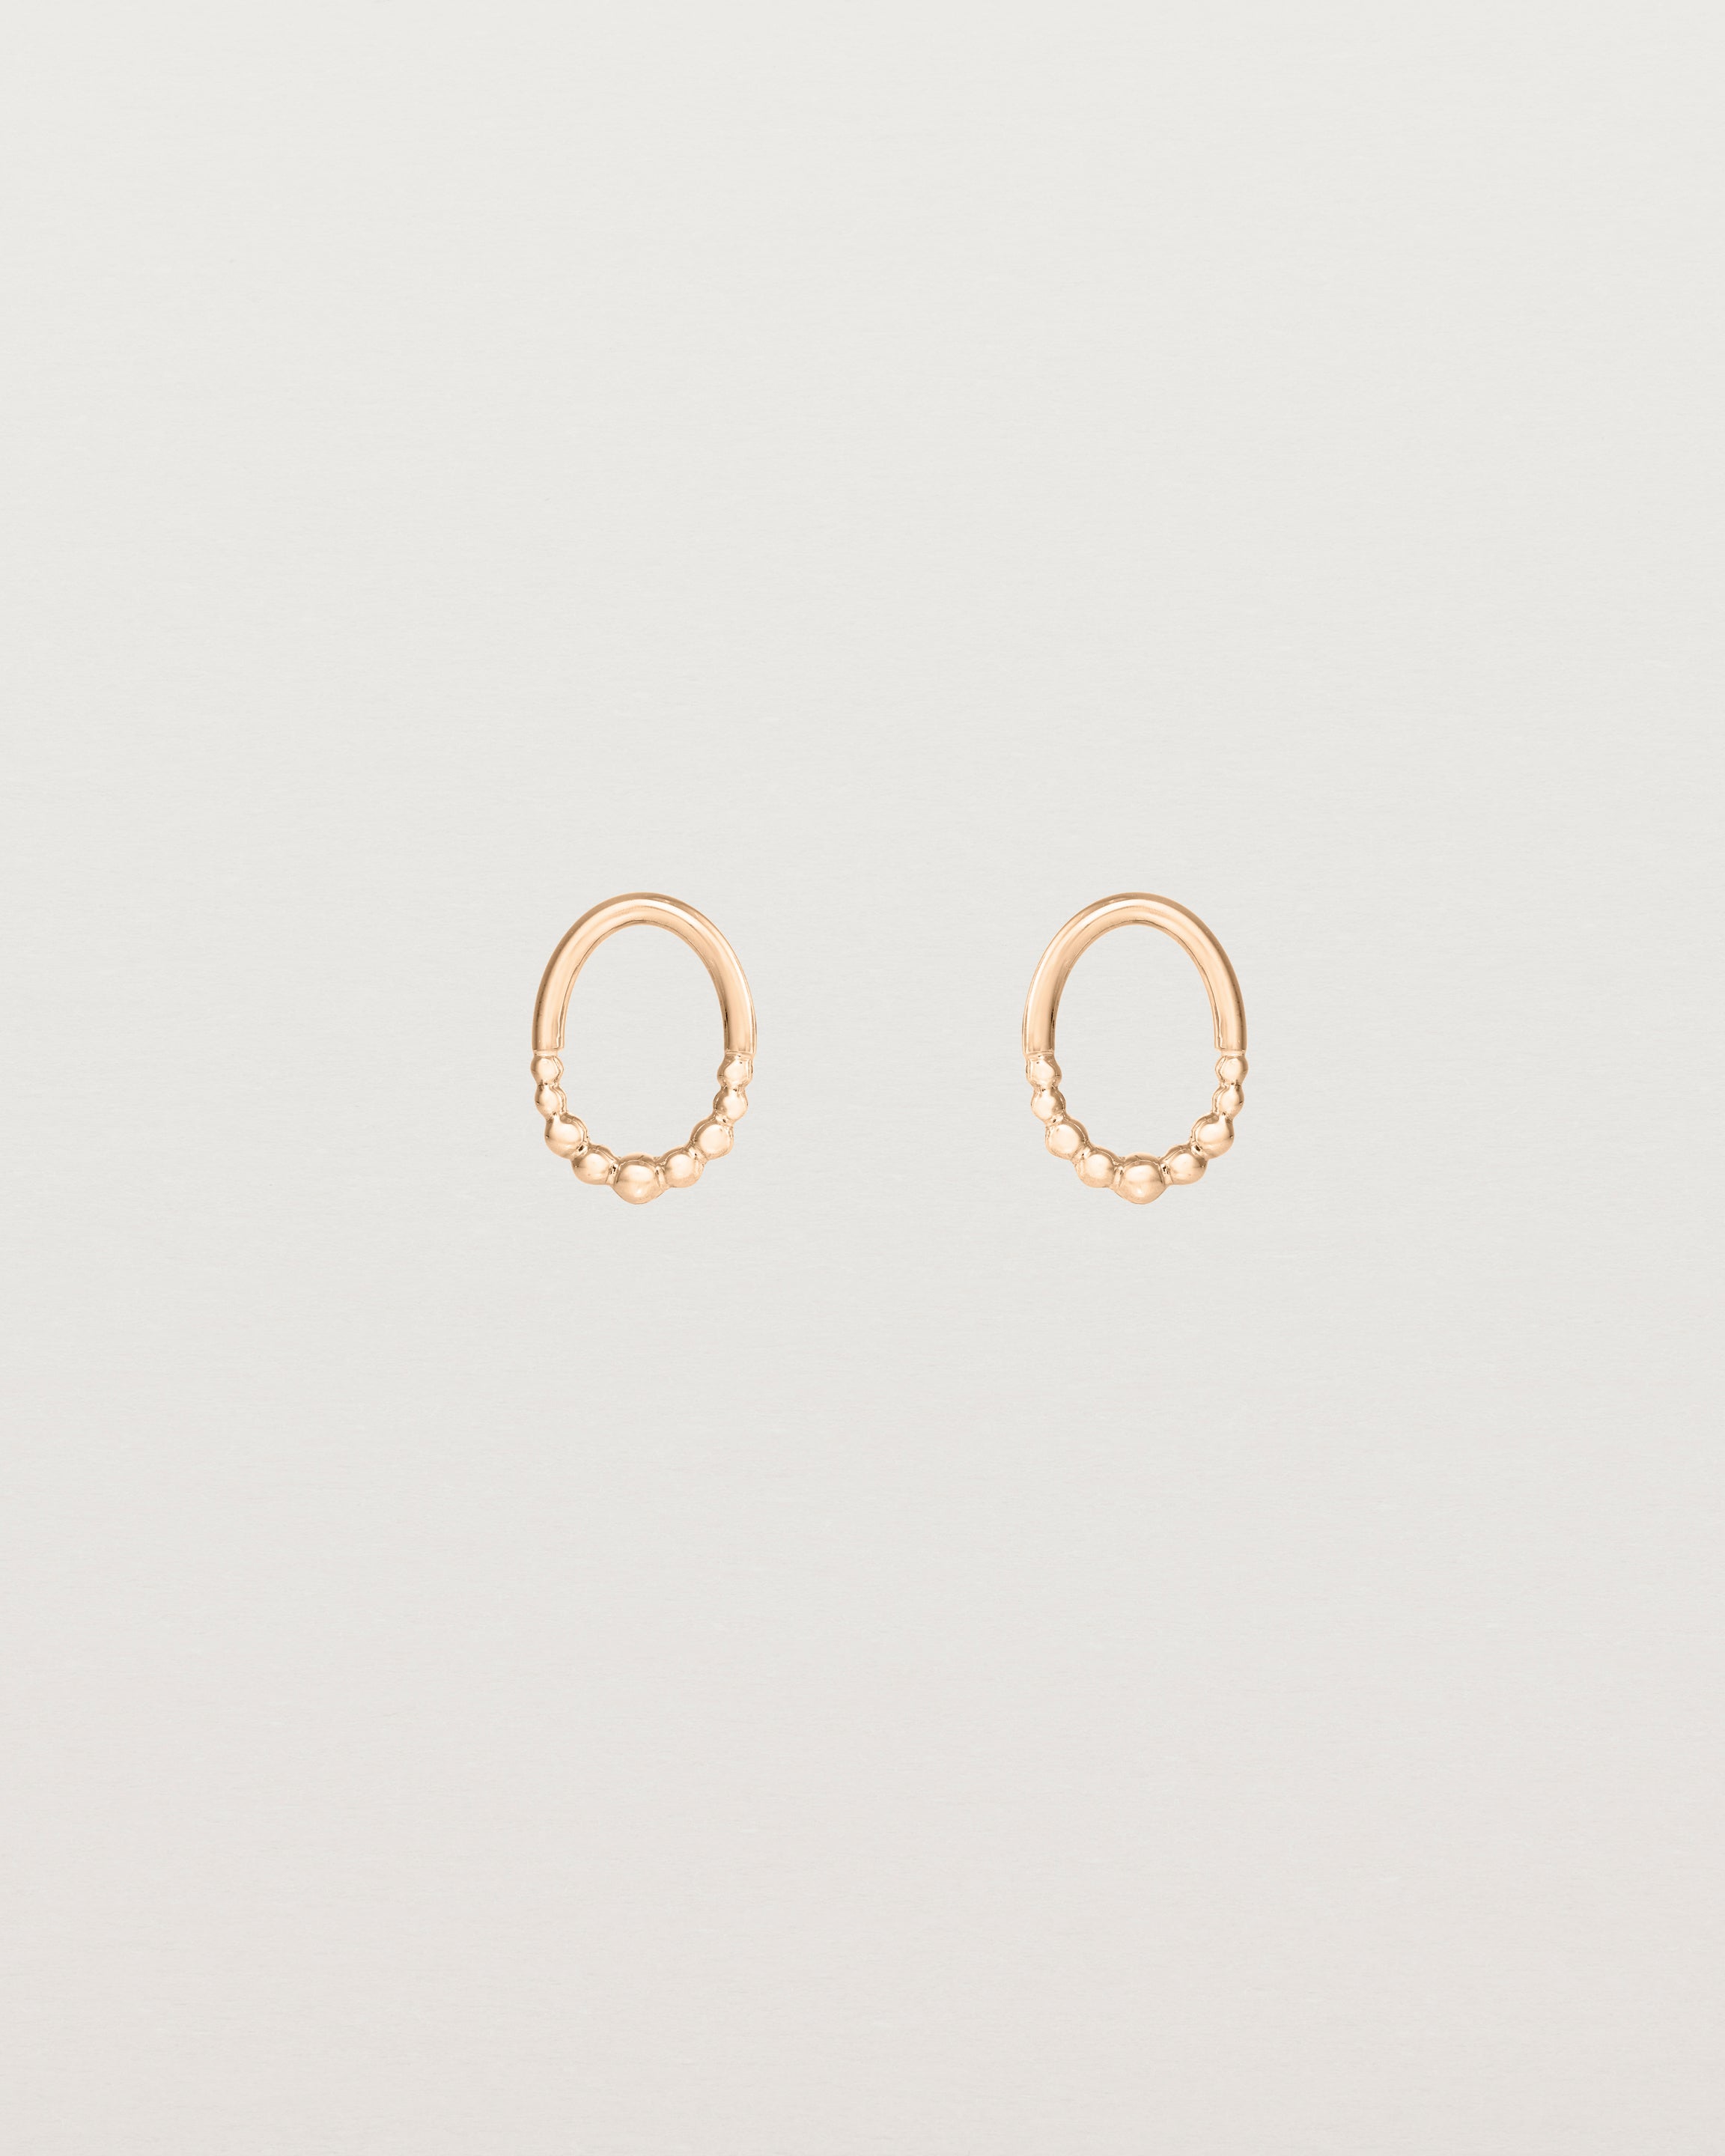 Front view of the Indra Studs in rose gold.